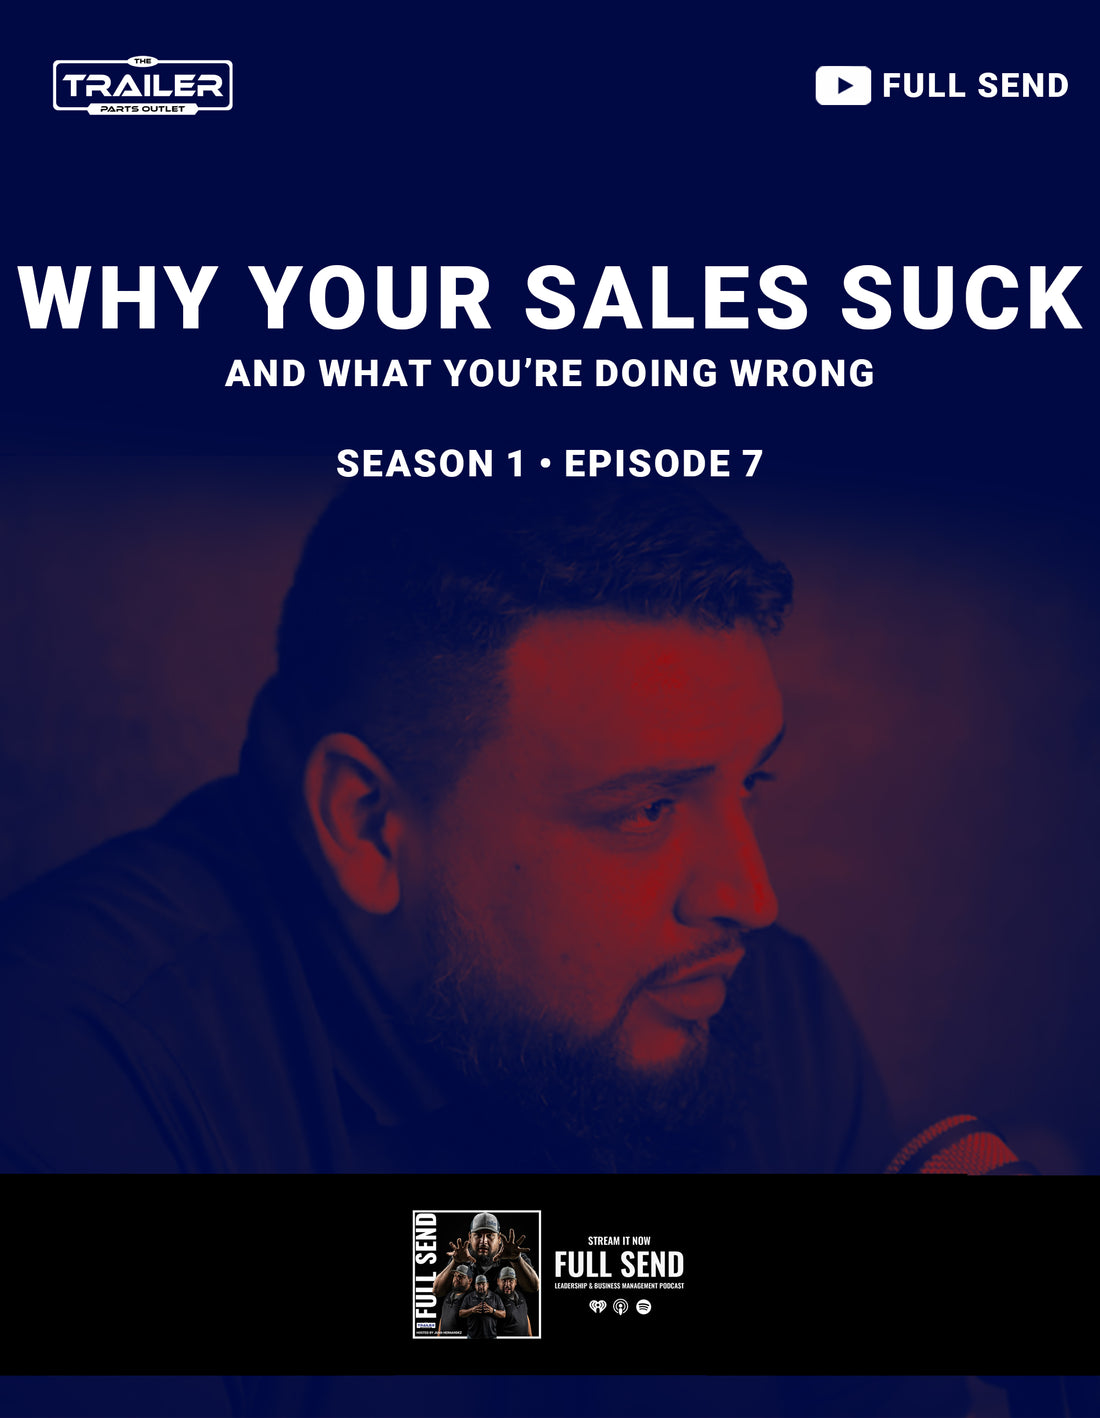 Why Your Sales Suck and What You Are Doing Wrong!